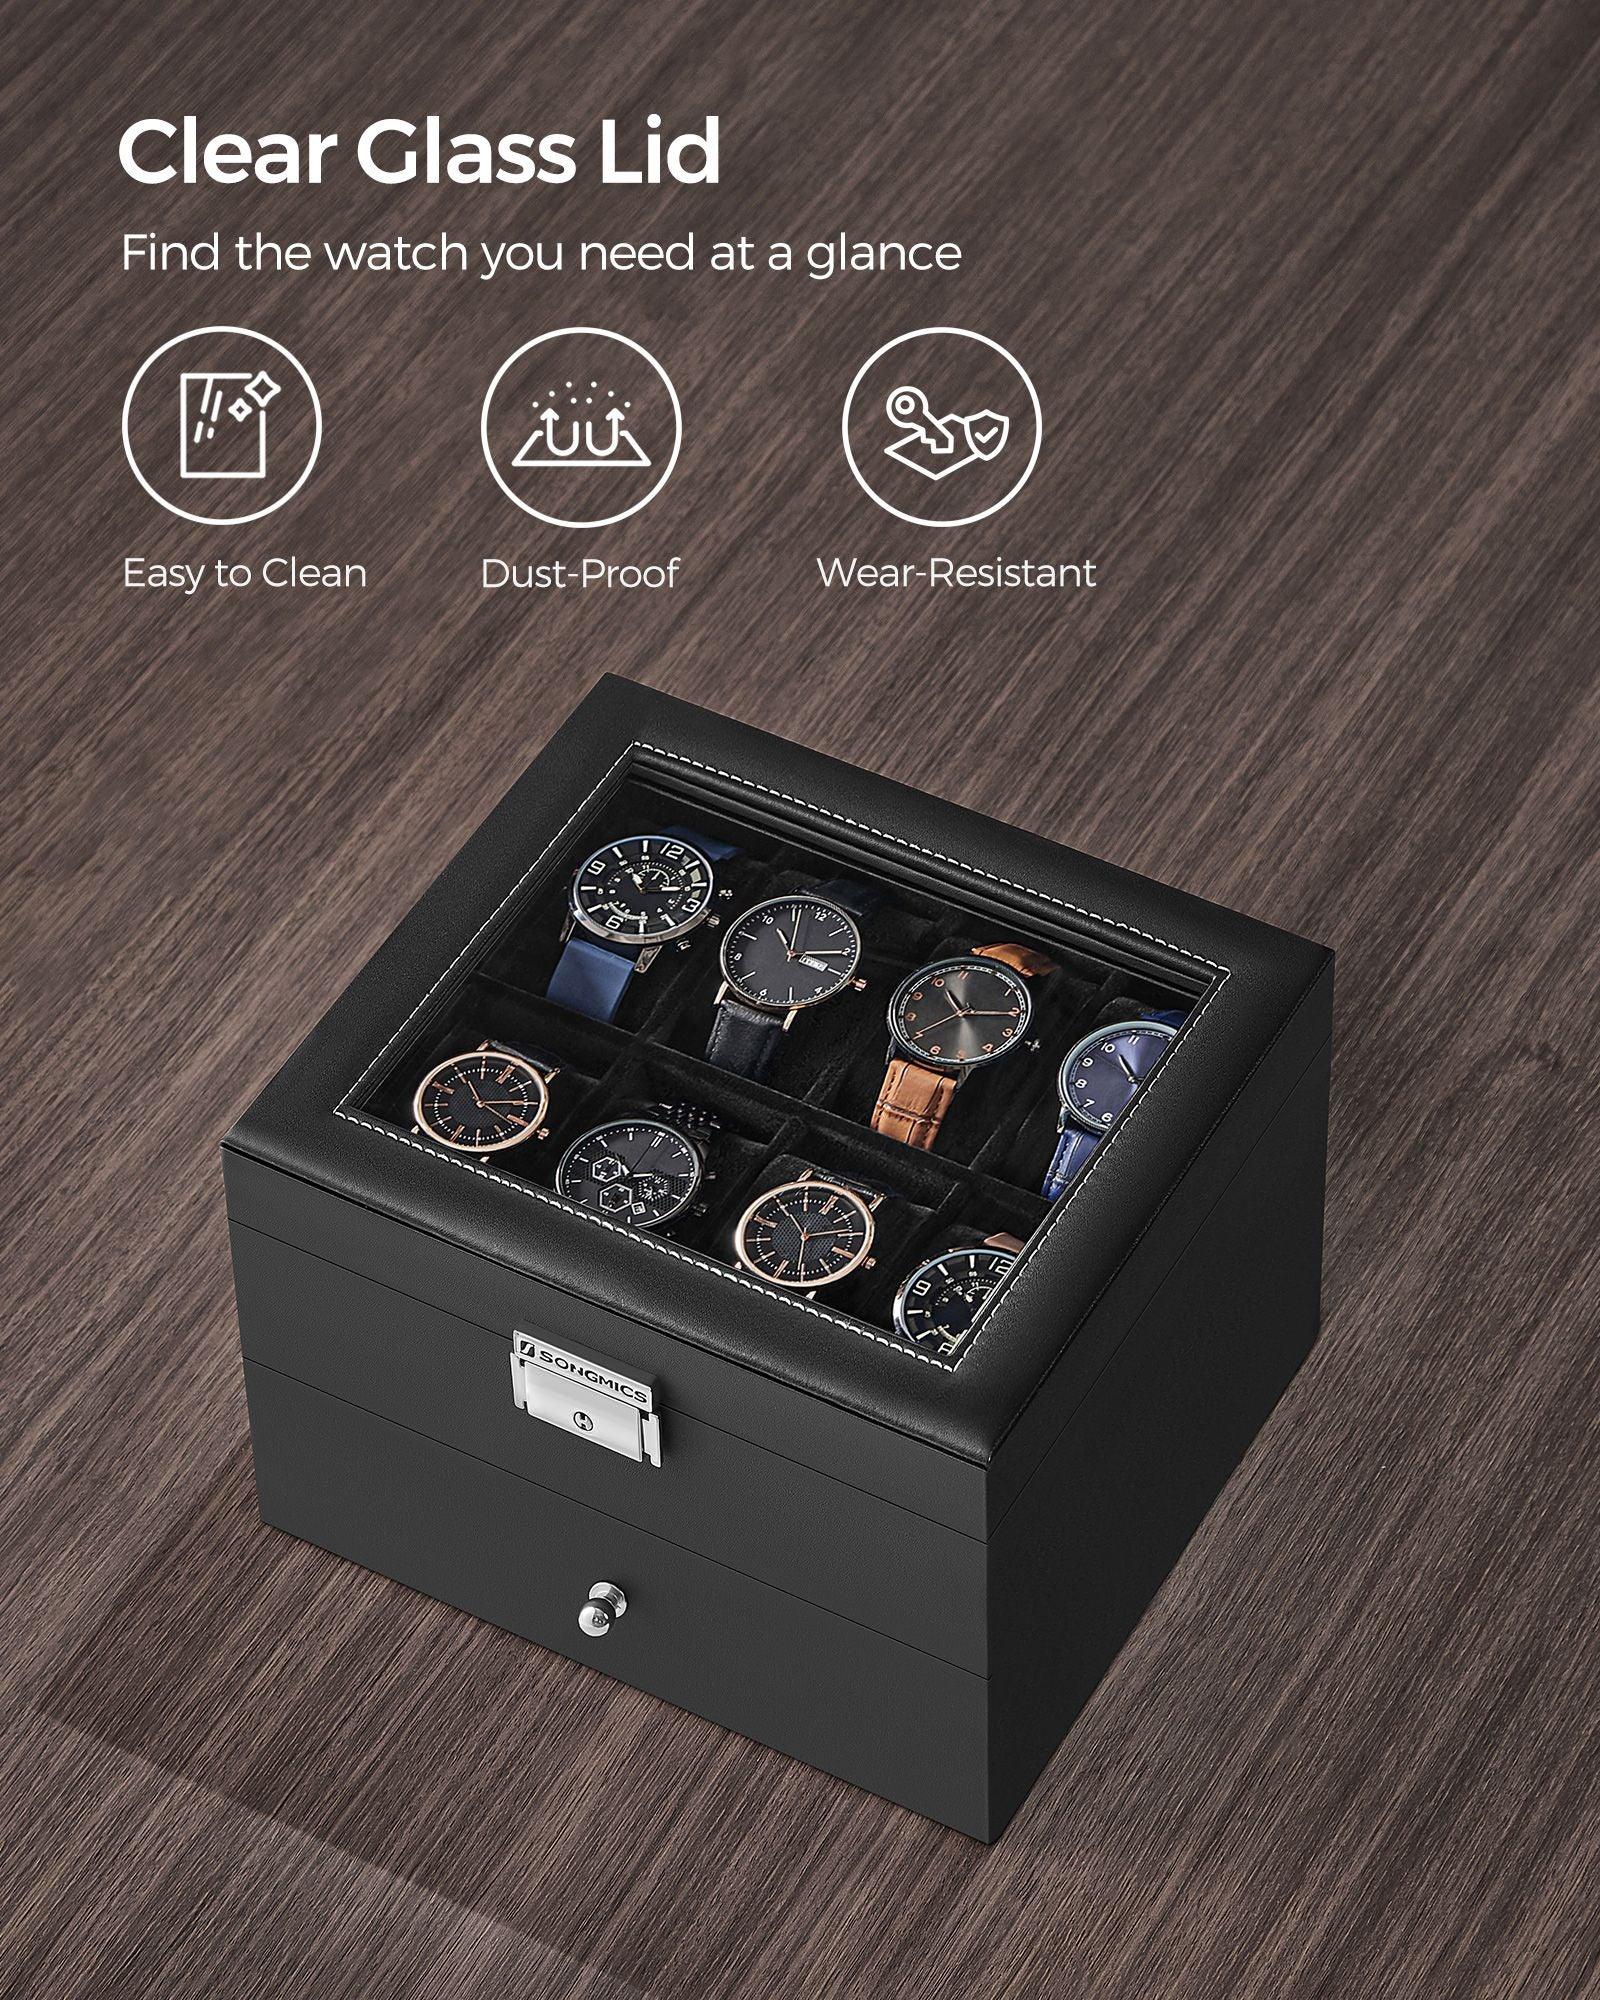 16-Slot Watch Box Black and Gray FredCo